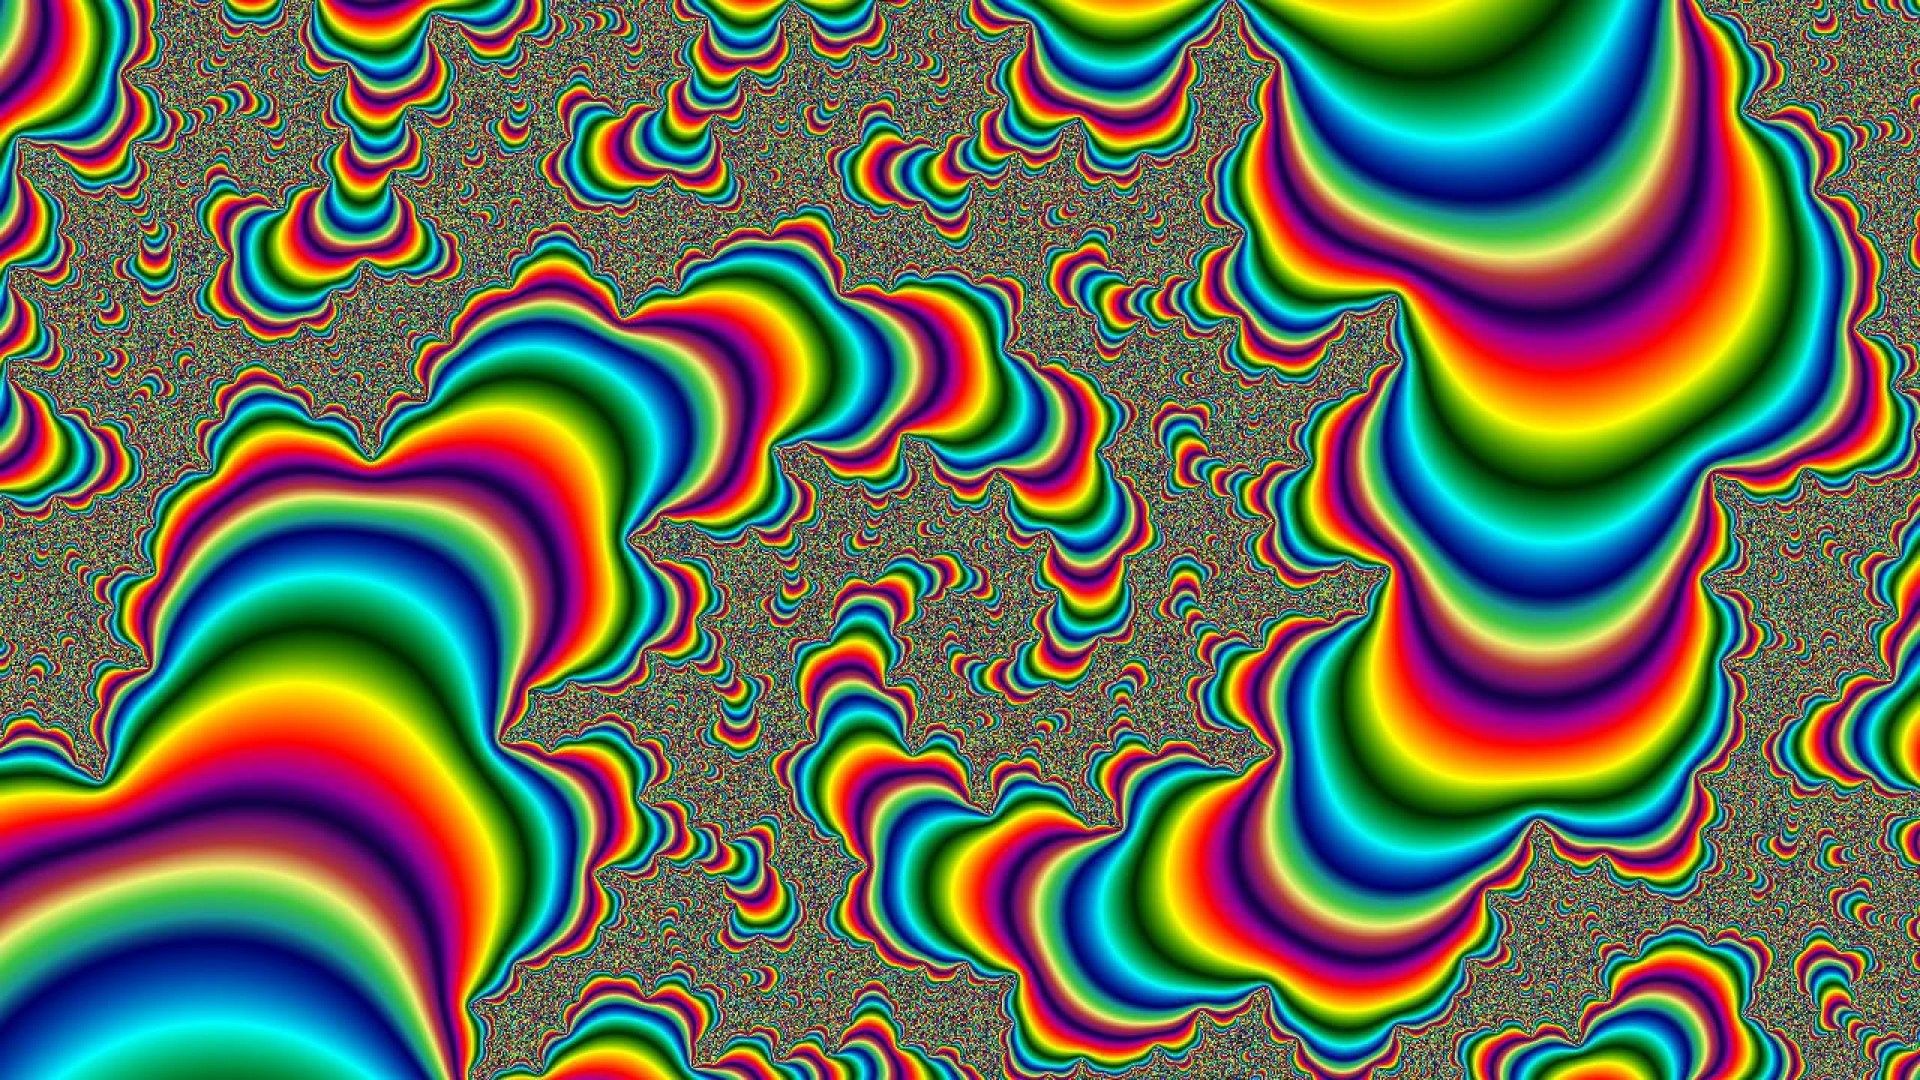 Rotating Wallpaper By Craig Berry Background Trippy HD Wallpaper